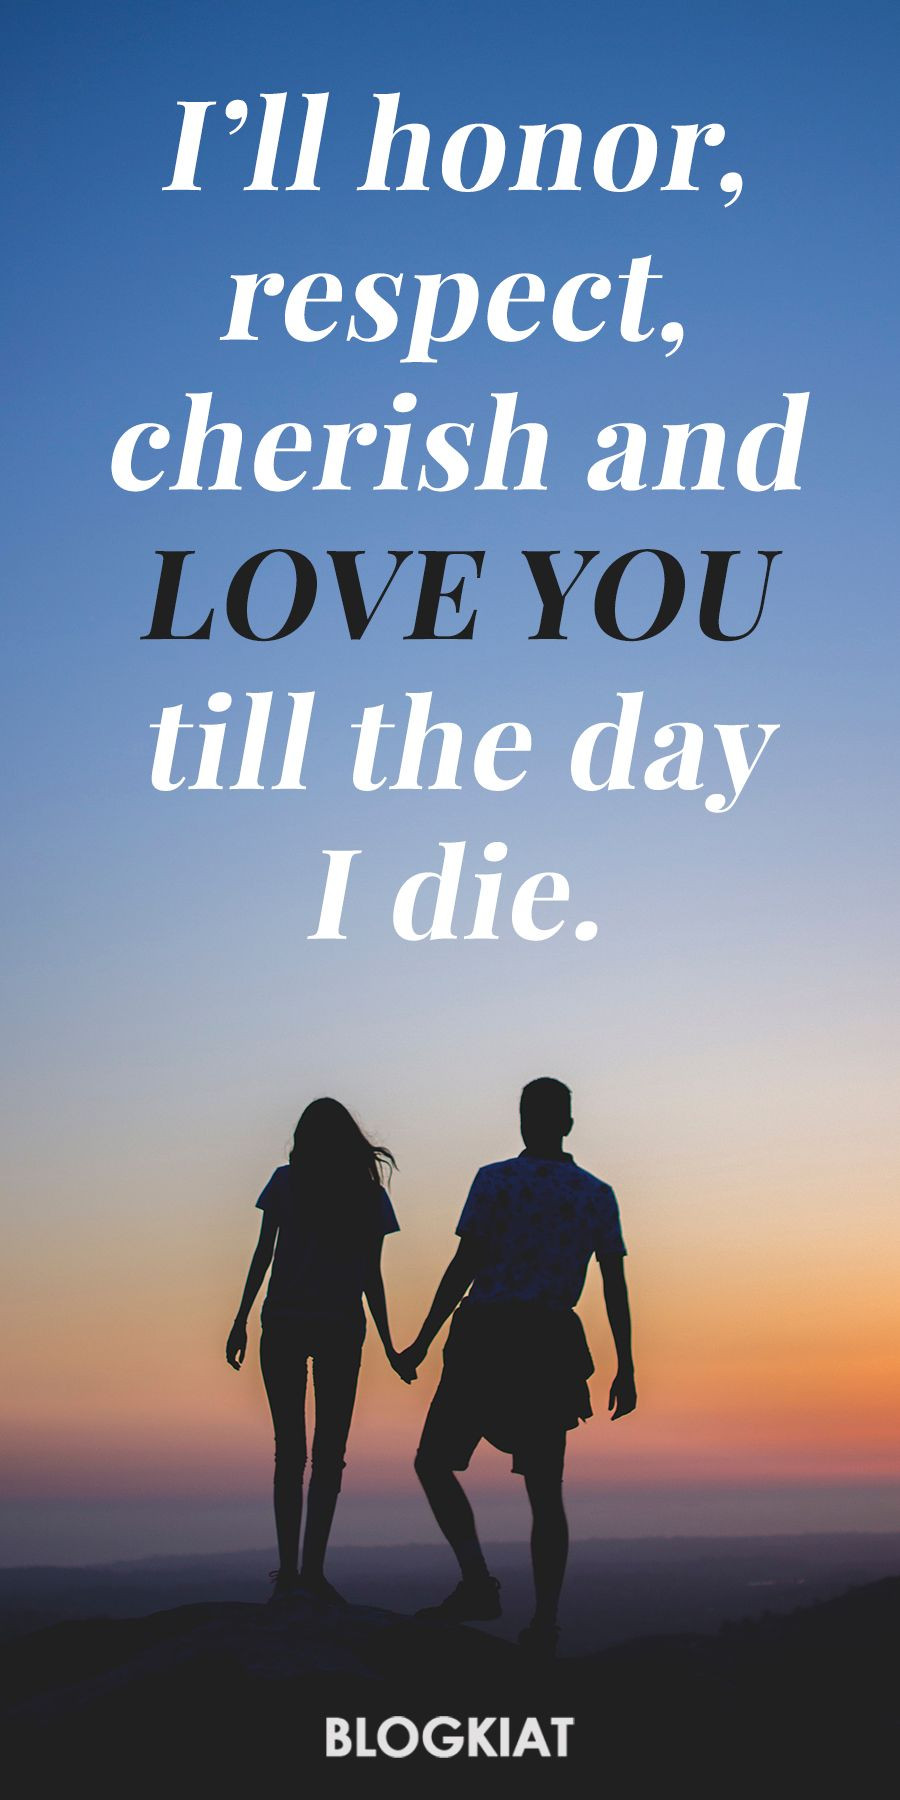 Romantic Quotes Her
 50 Sweet Cute & Romantic Love Quotes for Her